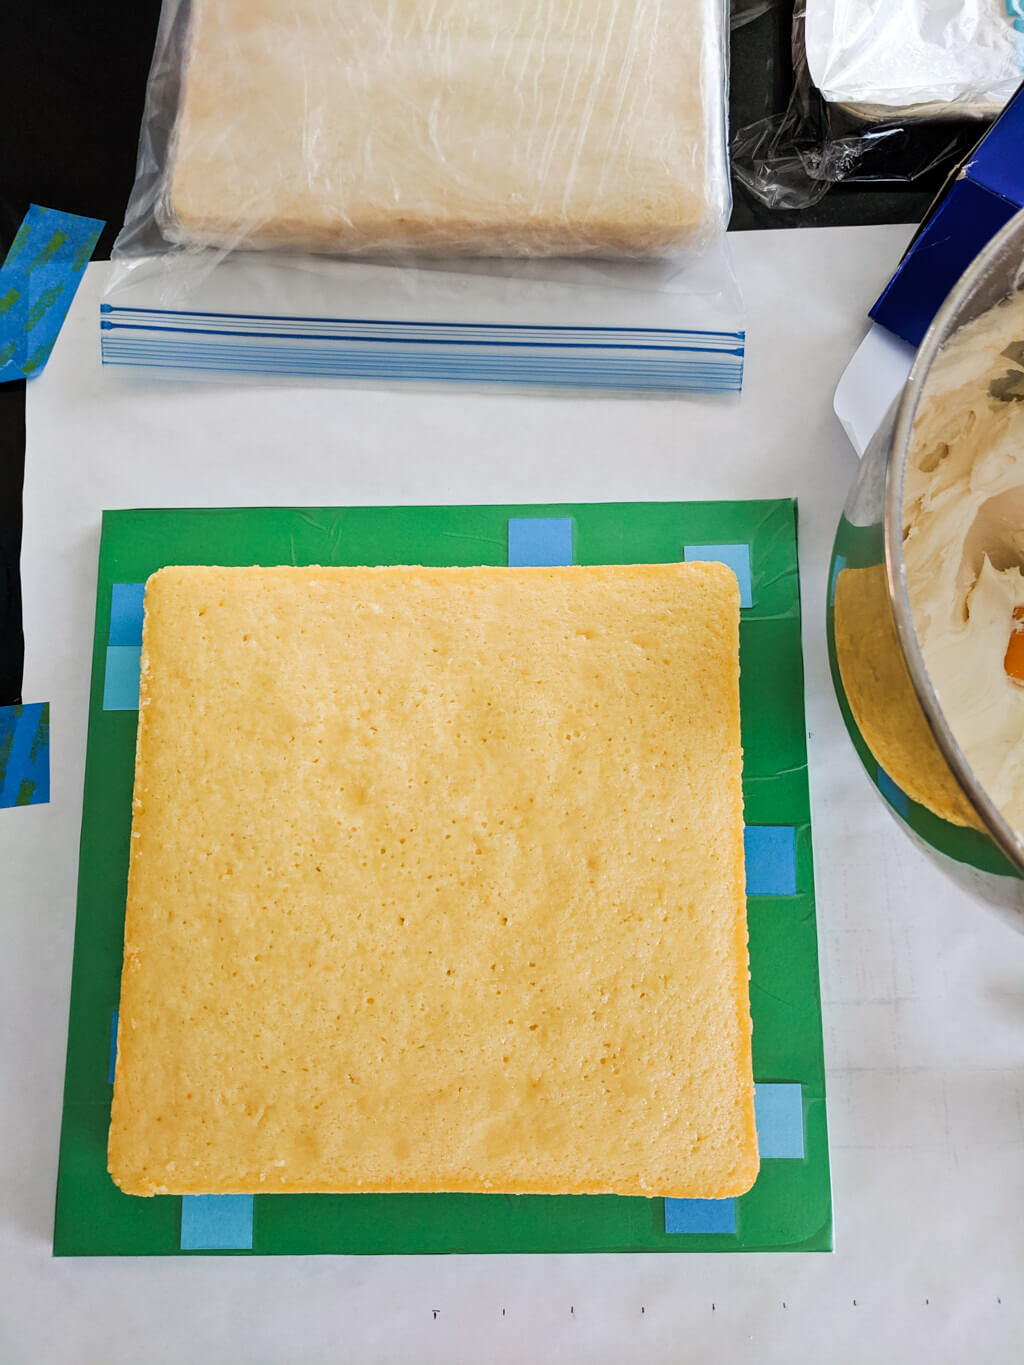 Square cake on a Minecraft cake board ready for icing